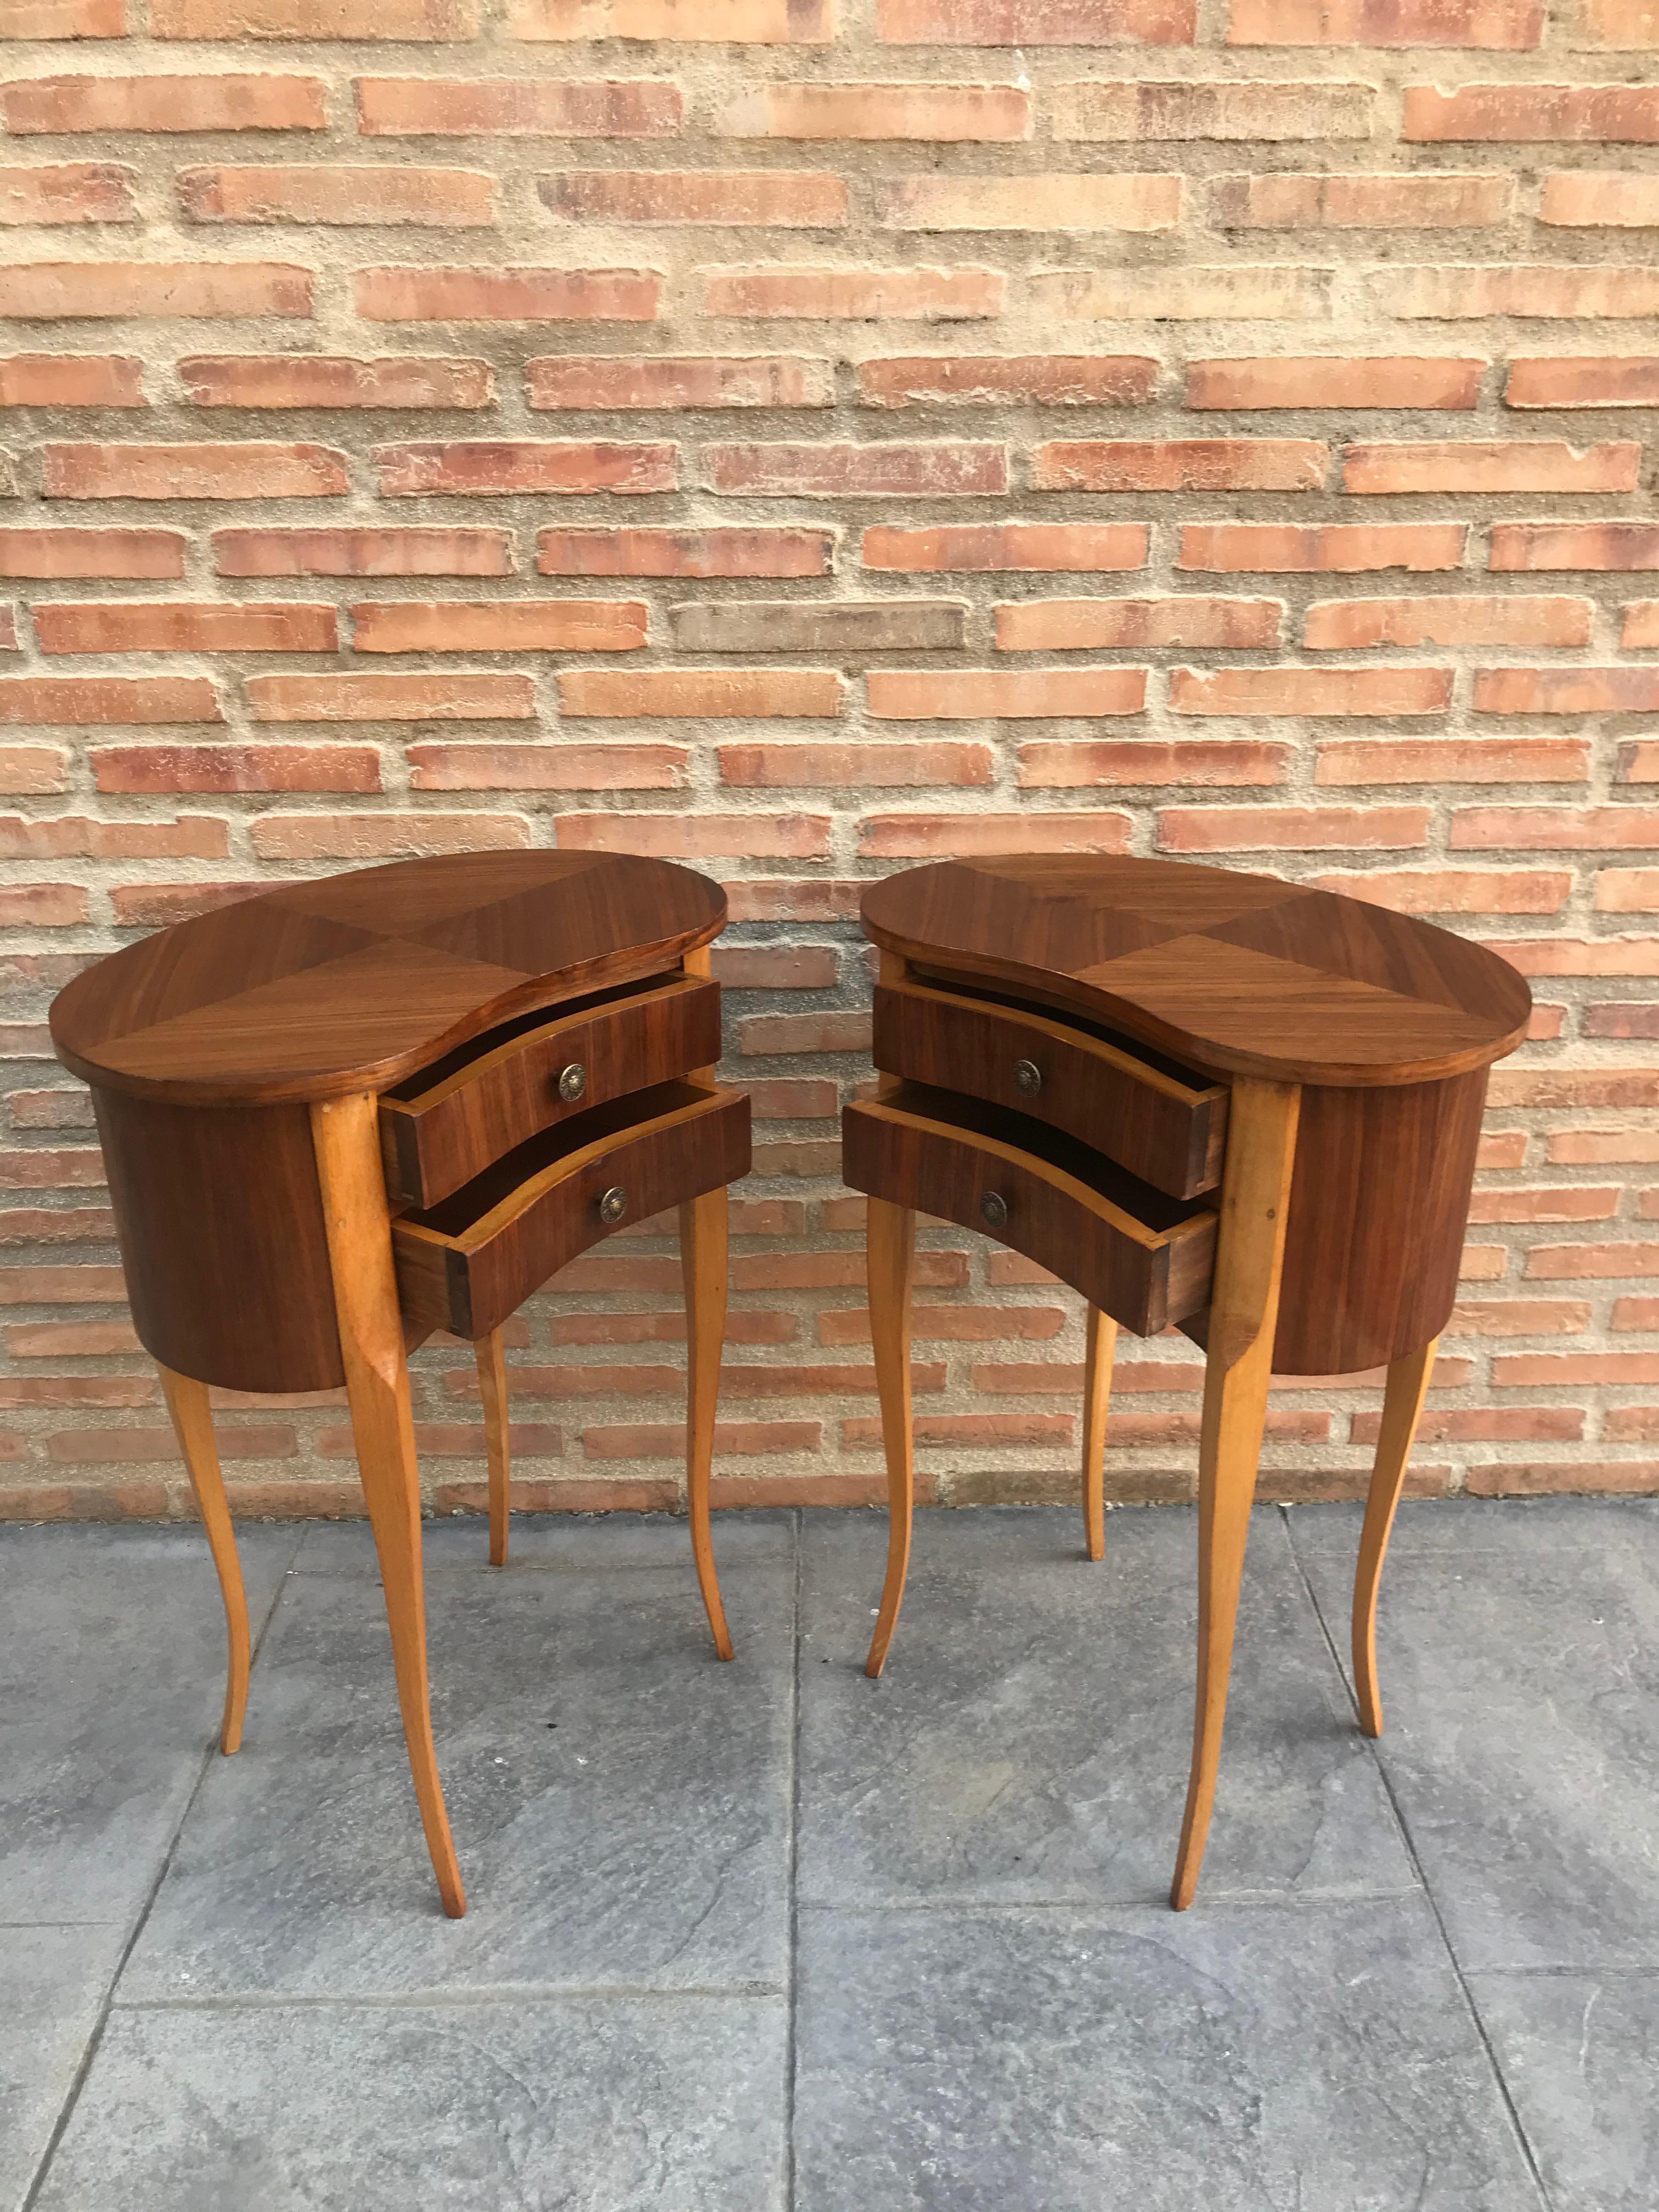 Walnut 20th Century Pair of Mahogany Nightstands with Kidney Shape and Two Drawers